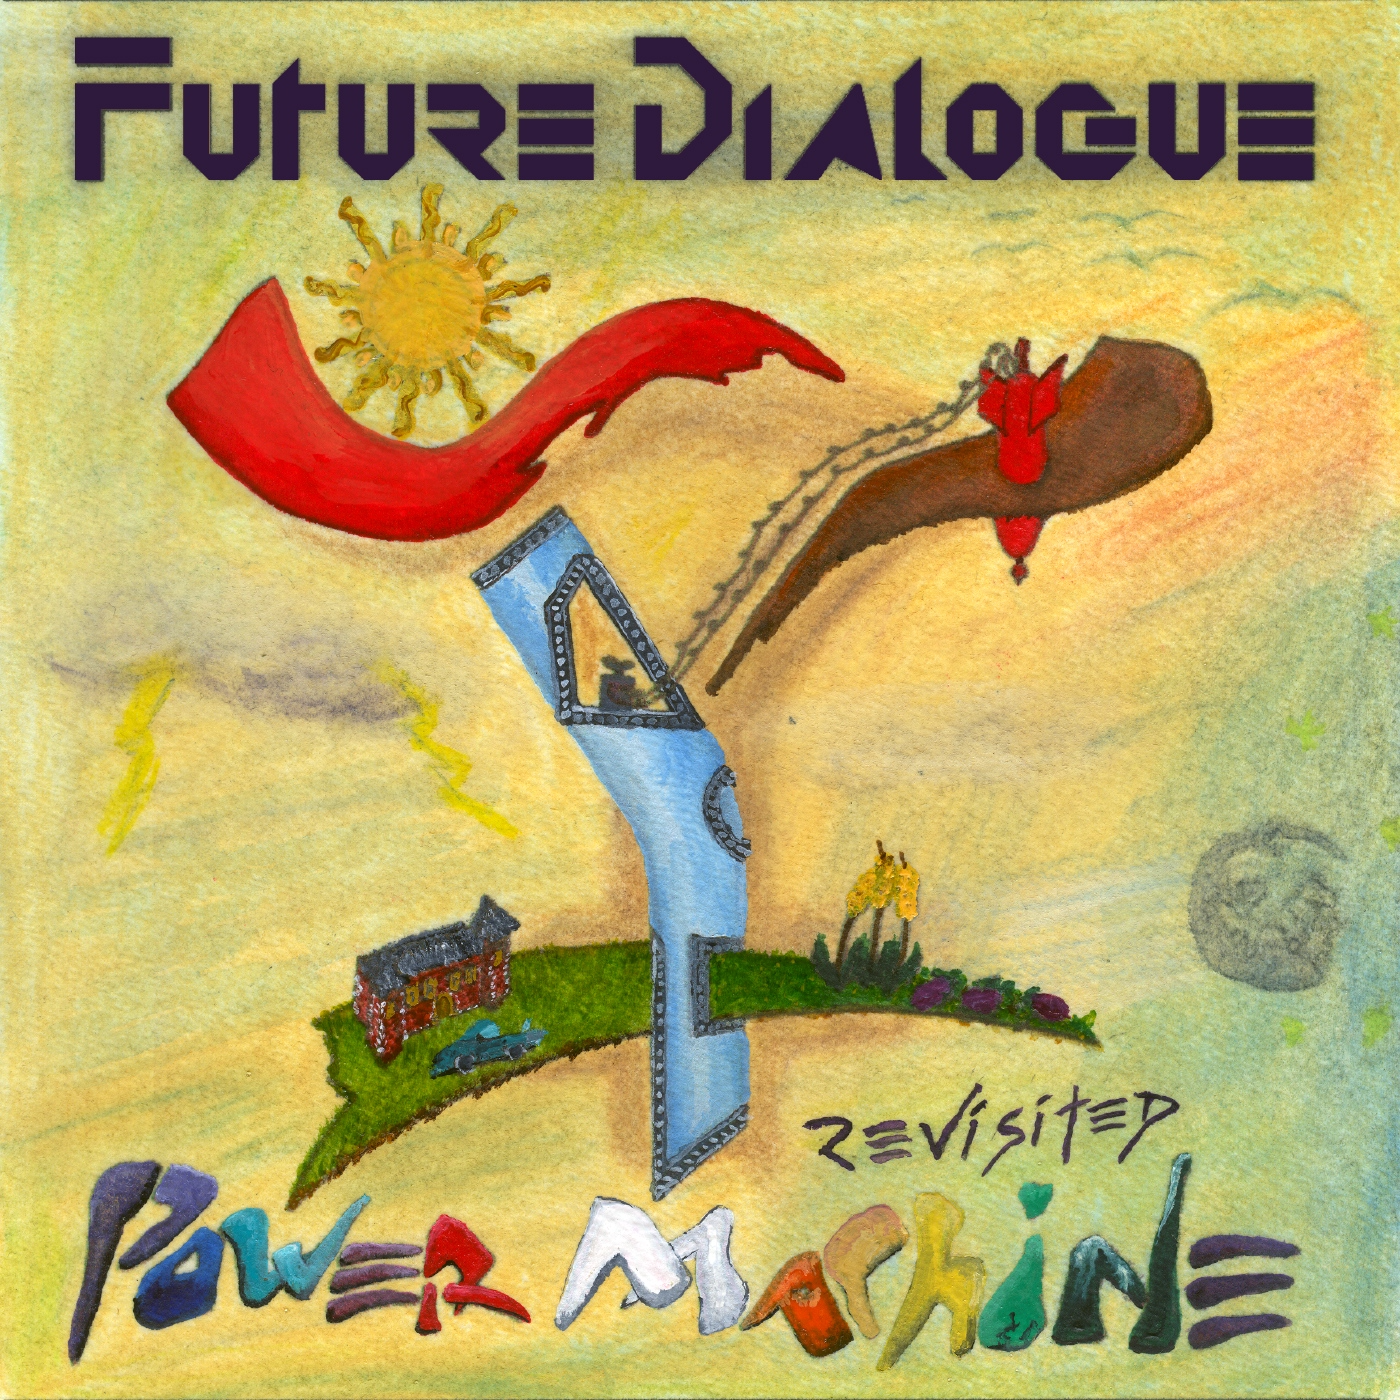 CD cover for "Power Machine revisited" from Future Dialogue